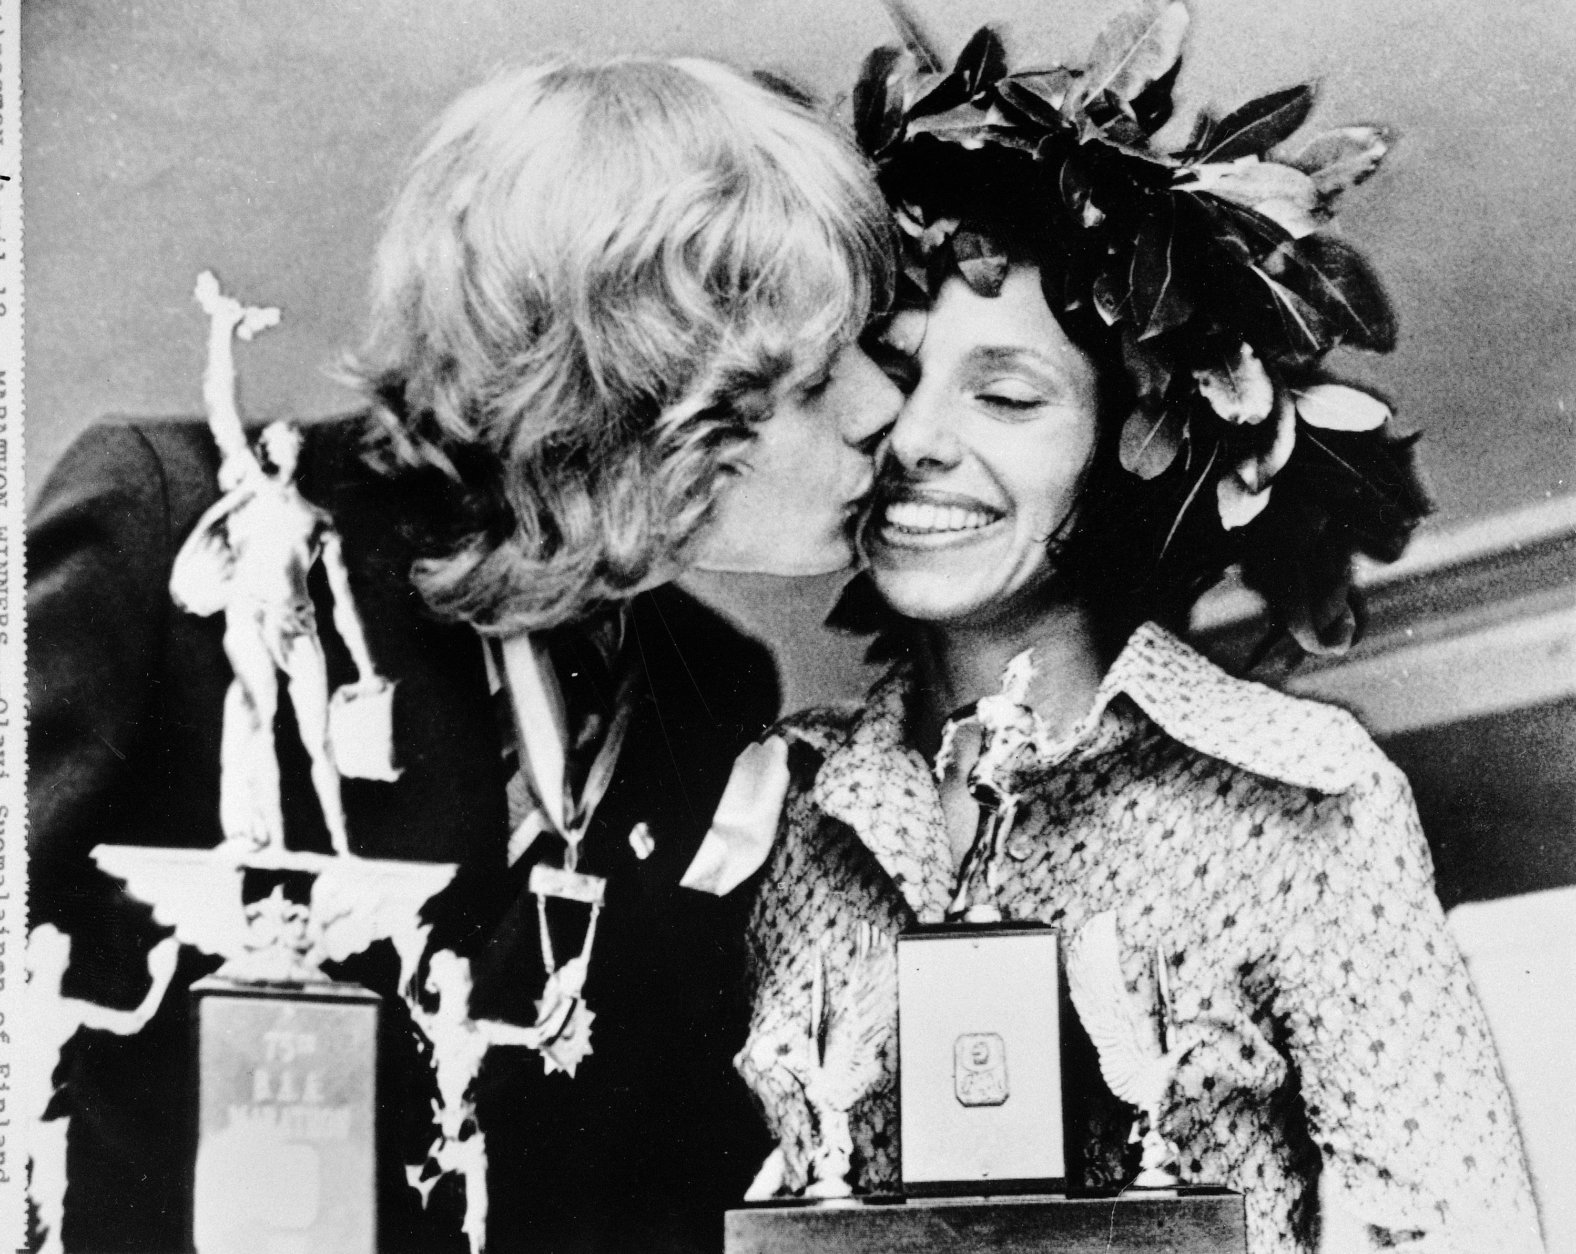 Olavi Suomalainen of Finland, winner of the men's division of the Boston A.A. Marathon April 17, 1972, kisses Nina Kuscsik of Long Island, N.Y., winner of the women's division, at the trophy presentation April 18, 1972. The finish runner won the Hopkinton to Boston marathon 26 mile, 386 yard in two hours, 15 minutes and 30 seconds. Nina's time was three hours, 10 minutes, 58 seconds. (AP Photo)